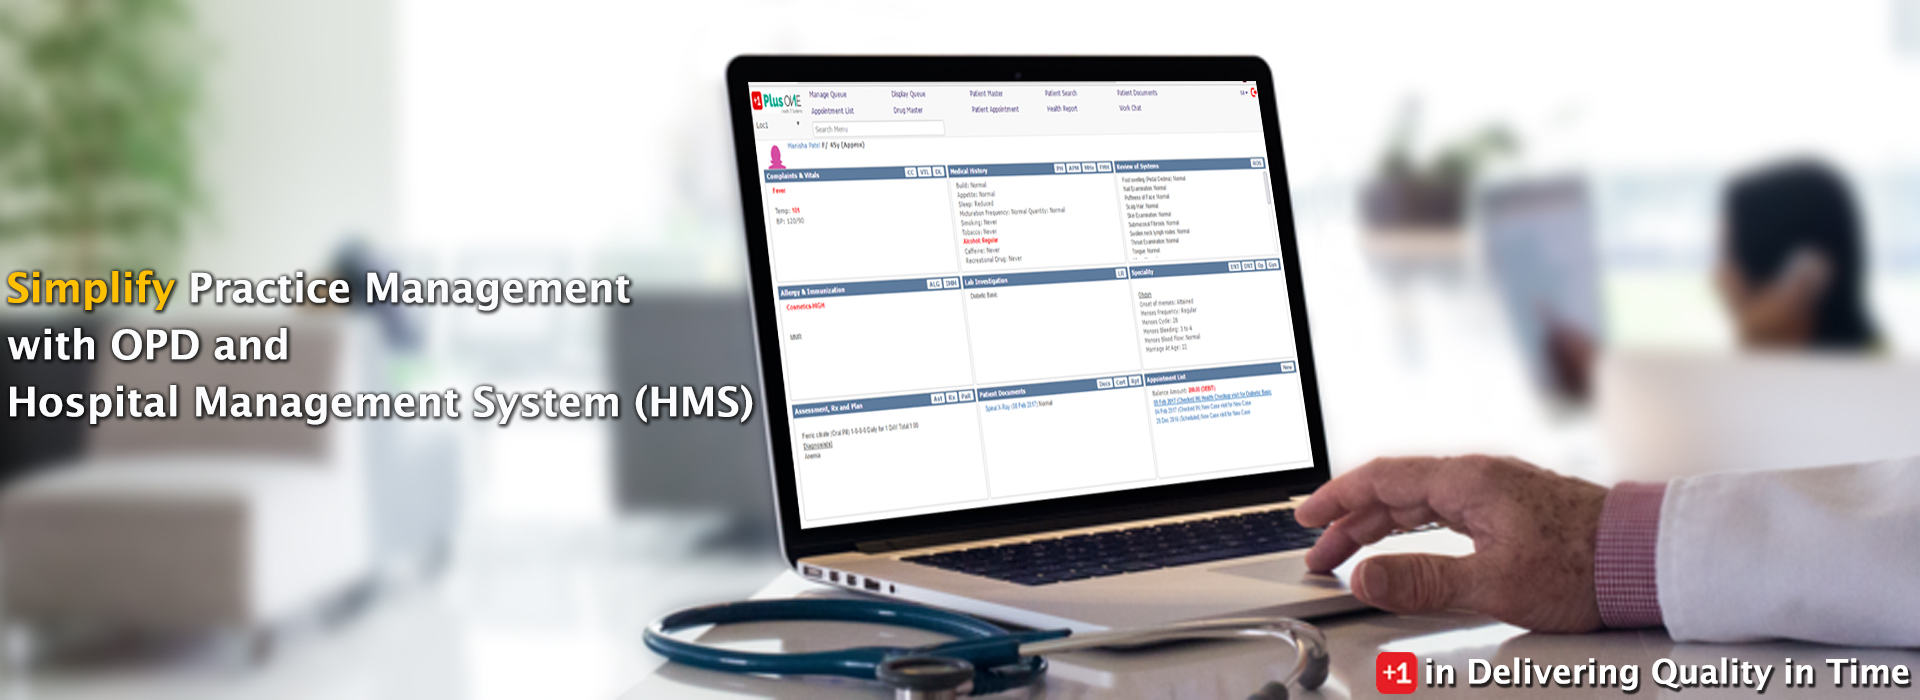 Plus1 OPD and Hospital Management System (HMS)